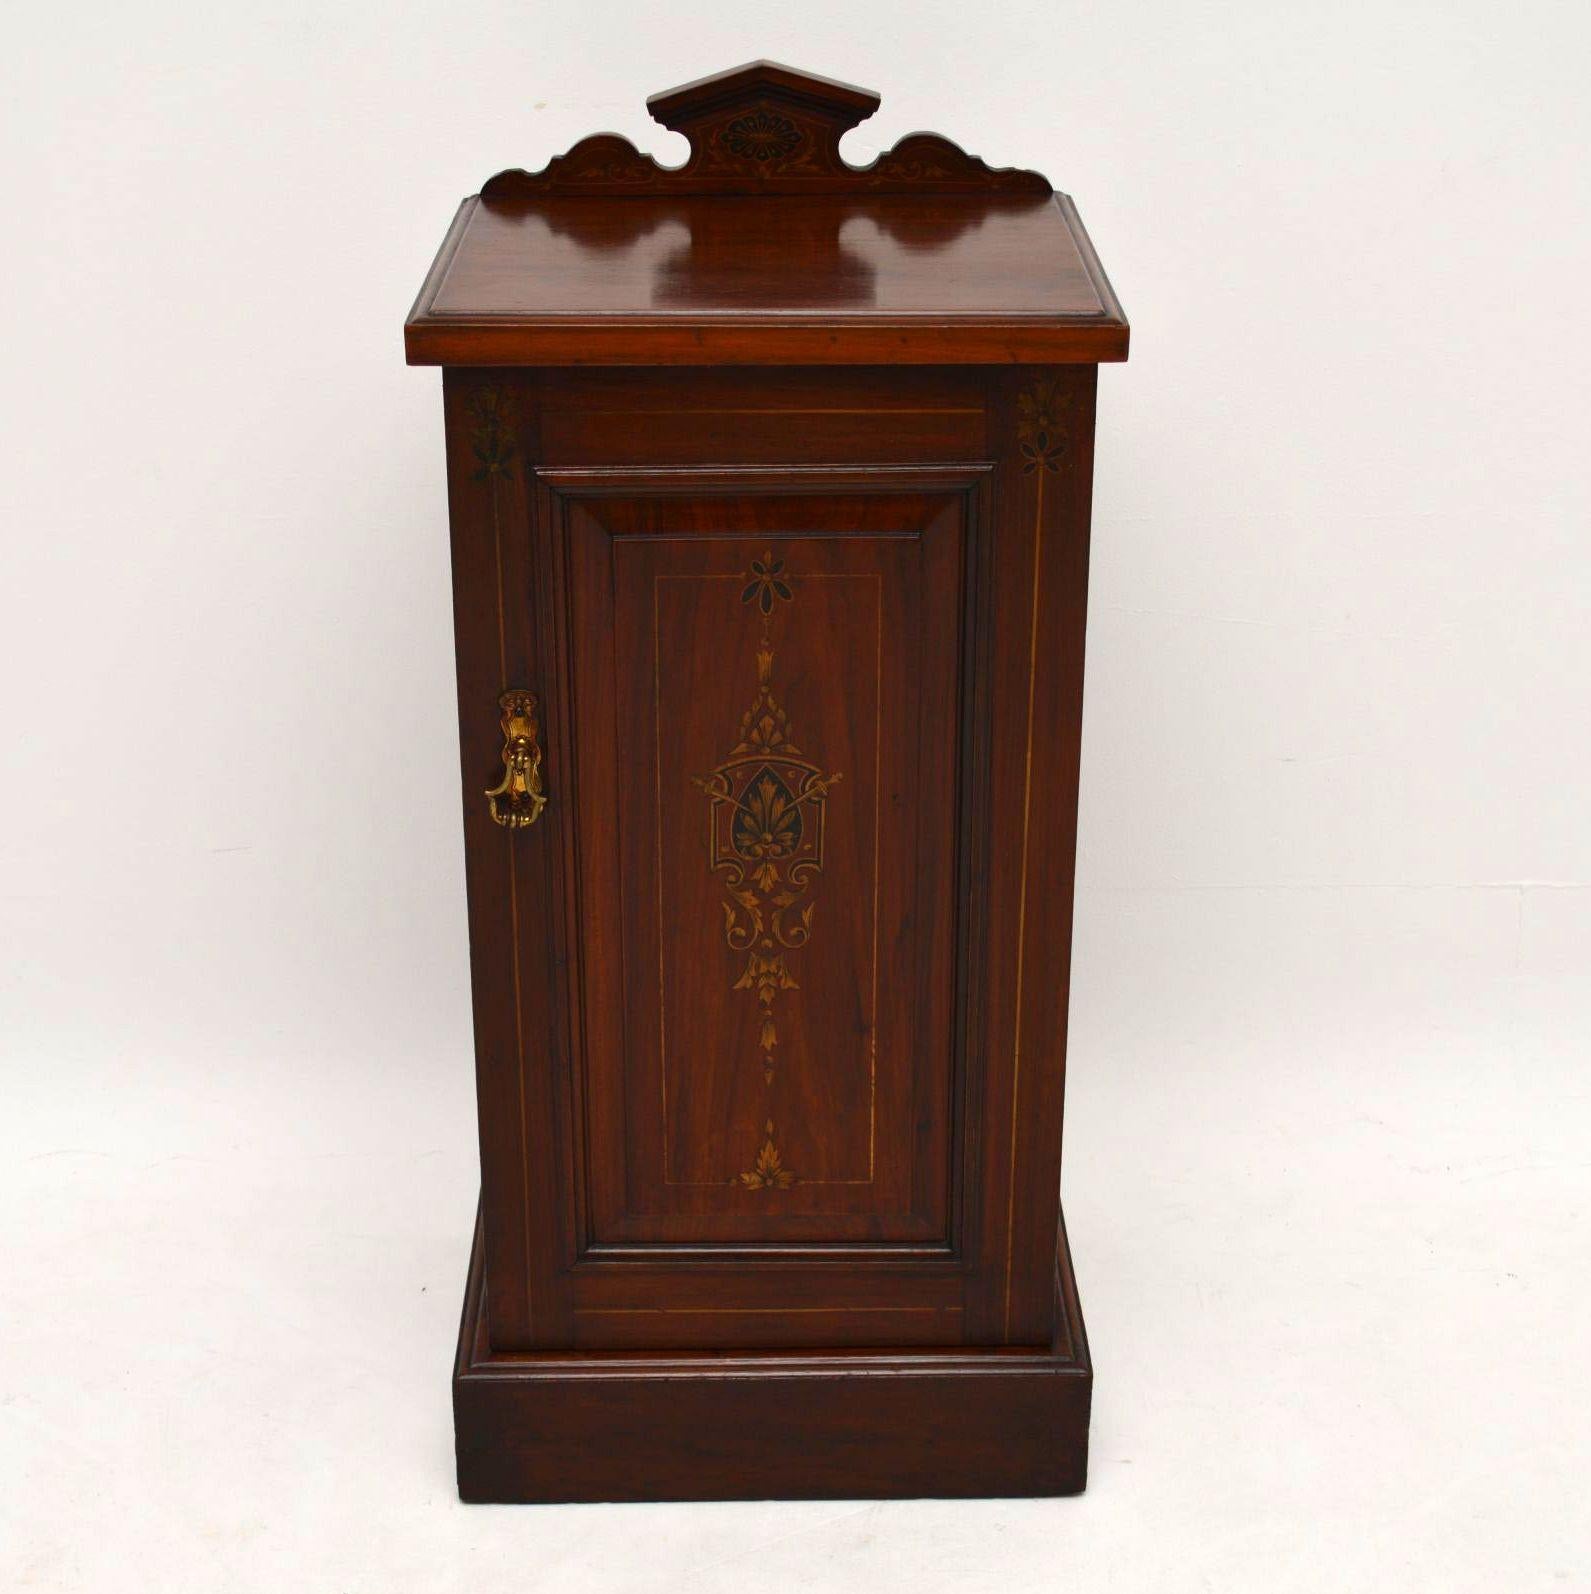 Fine quality antique Victorian mahogany bedside cabinet with decorative paintwork. The wood has a very rich grain & looks like rosewood, but I'm fairly sure it's mahogany. It has the original gallery on the top, the original brass handle & sits on a